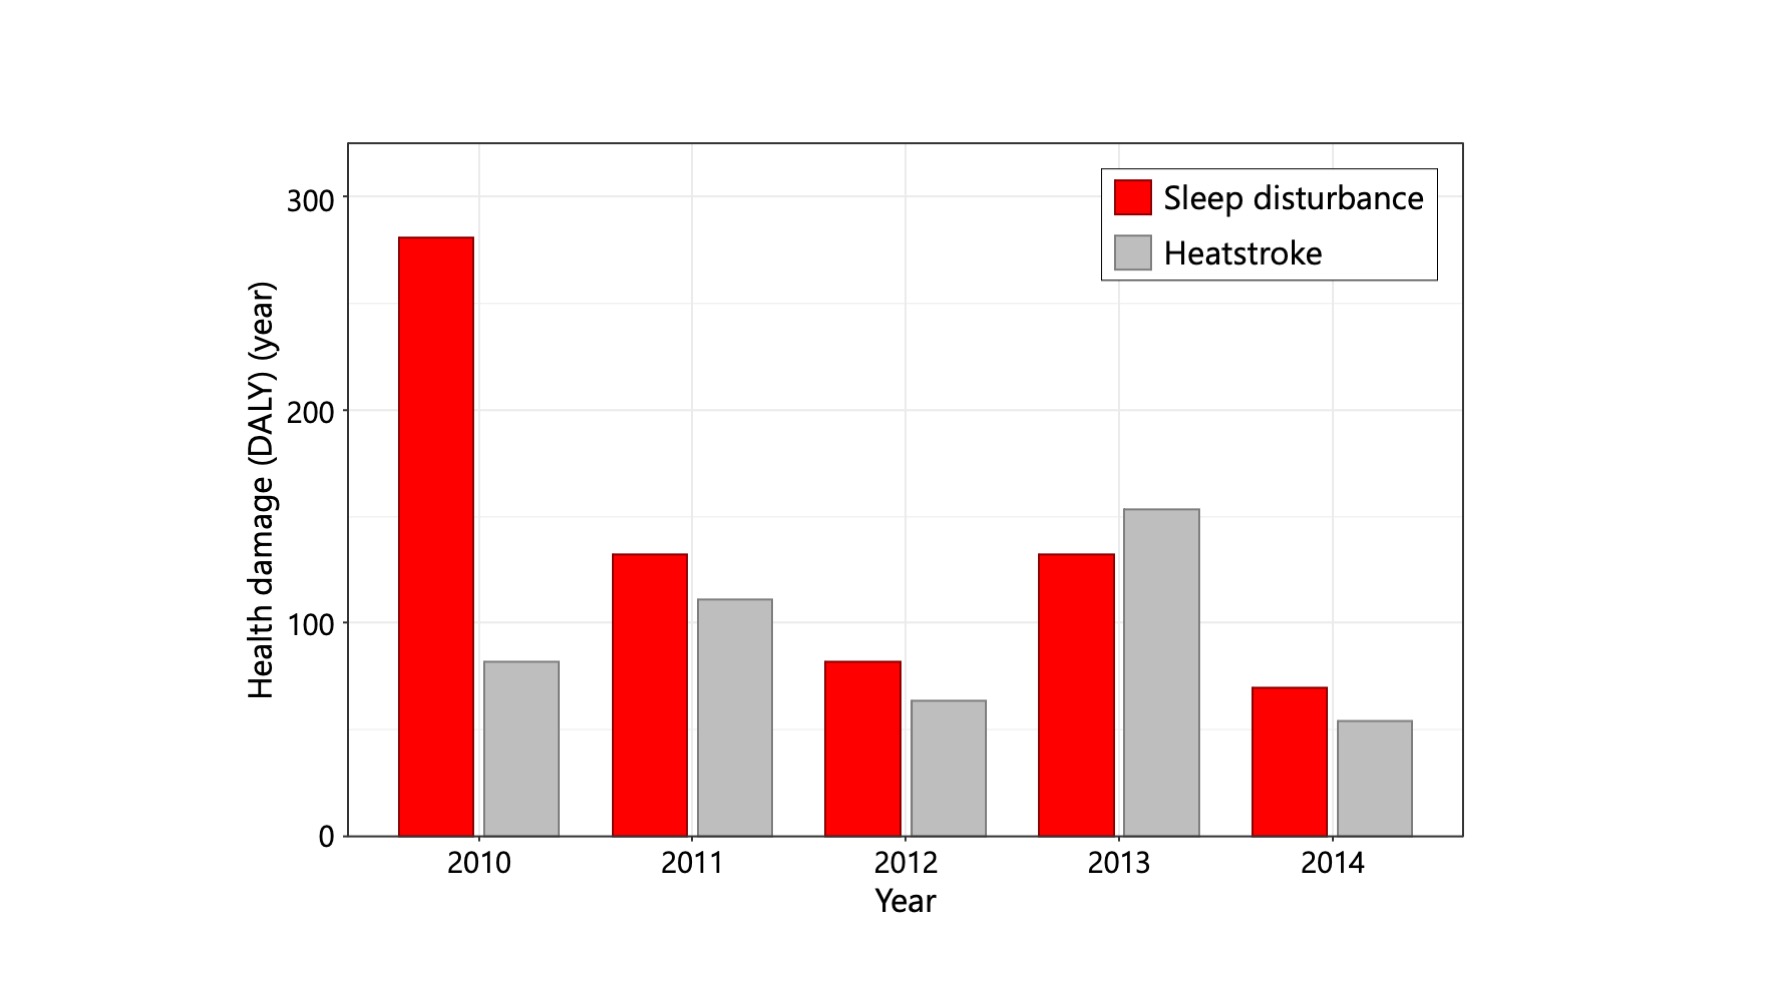 Bar chart comparing the DALY scores for heatstroke and sleep disturbance from 2010 to 2014